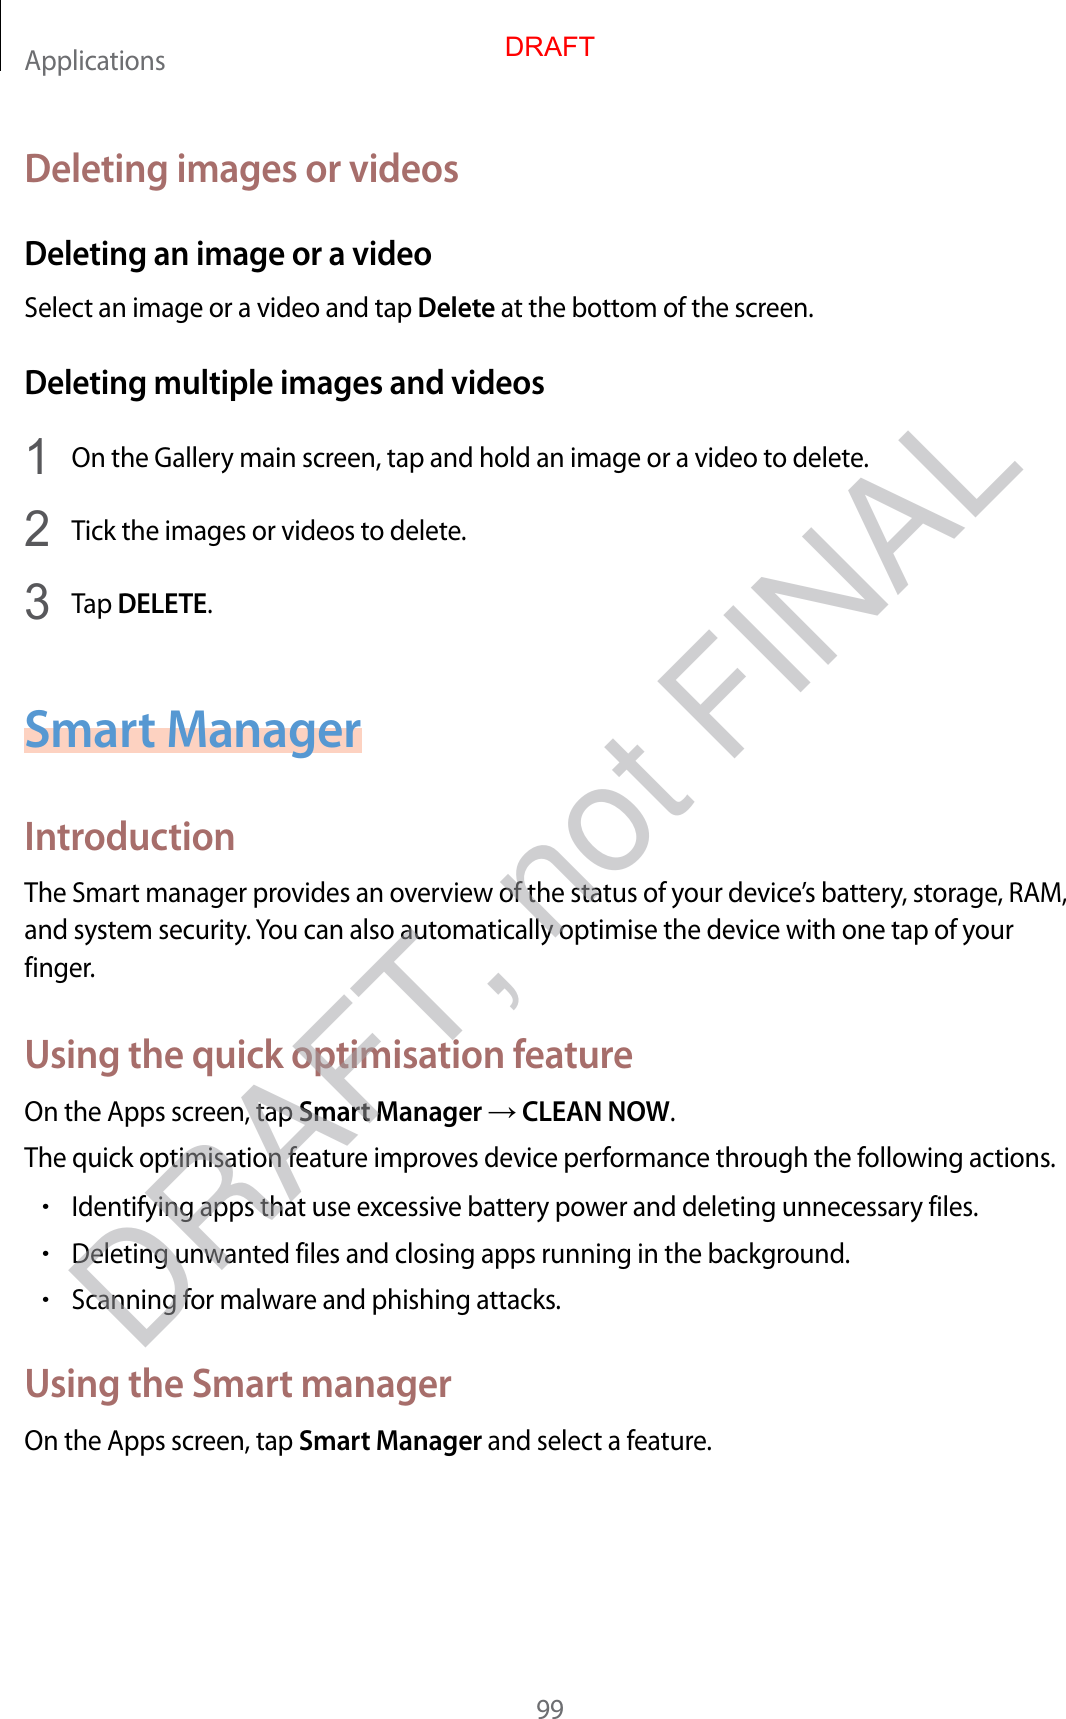 Applications99Deleting images or videosDeleting an image or a videoSelect an image or a video and tap Delete at the bottom of the screen.Deleting multiple images and videos1  On the Gallery main screen, tap and hold an image or a video to delete.2  Tick the images or videos to delete.3  Tap DELETE.Smart ManagerIntroductionThe Smart manager provides an overview of the status of your device’s battery, storage, RAM, and system security. You can also automatically optimise the device with one tap of your finger.Using the quick optimisation featureOn the Apps screen, tap Smart Manager  CLEAN NOW.The quick optimisation feature improves device performance through the following actions.•Identifying apps that use excessive battery power and deleting unnecessary files.•Deleting unwanted files and closing apps running in the background.•Scanning for malware and phishing attacks.Using the Smart managerOn the Apps screen, tap Smart Manager and select a feature.DRAFTDRAFT, not FINAL